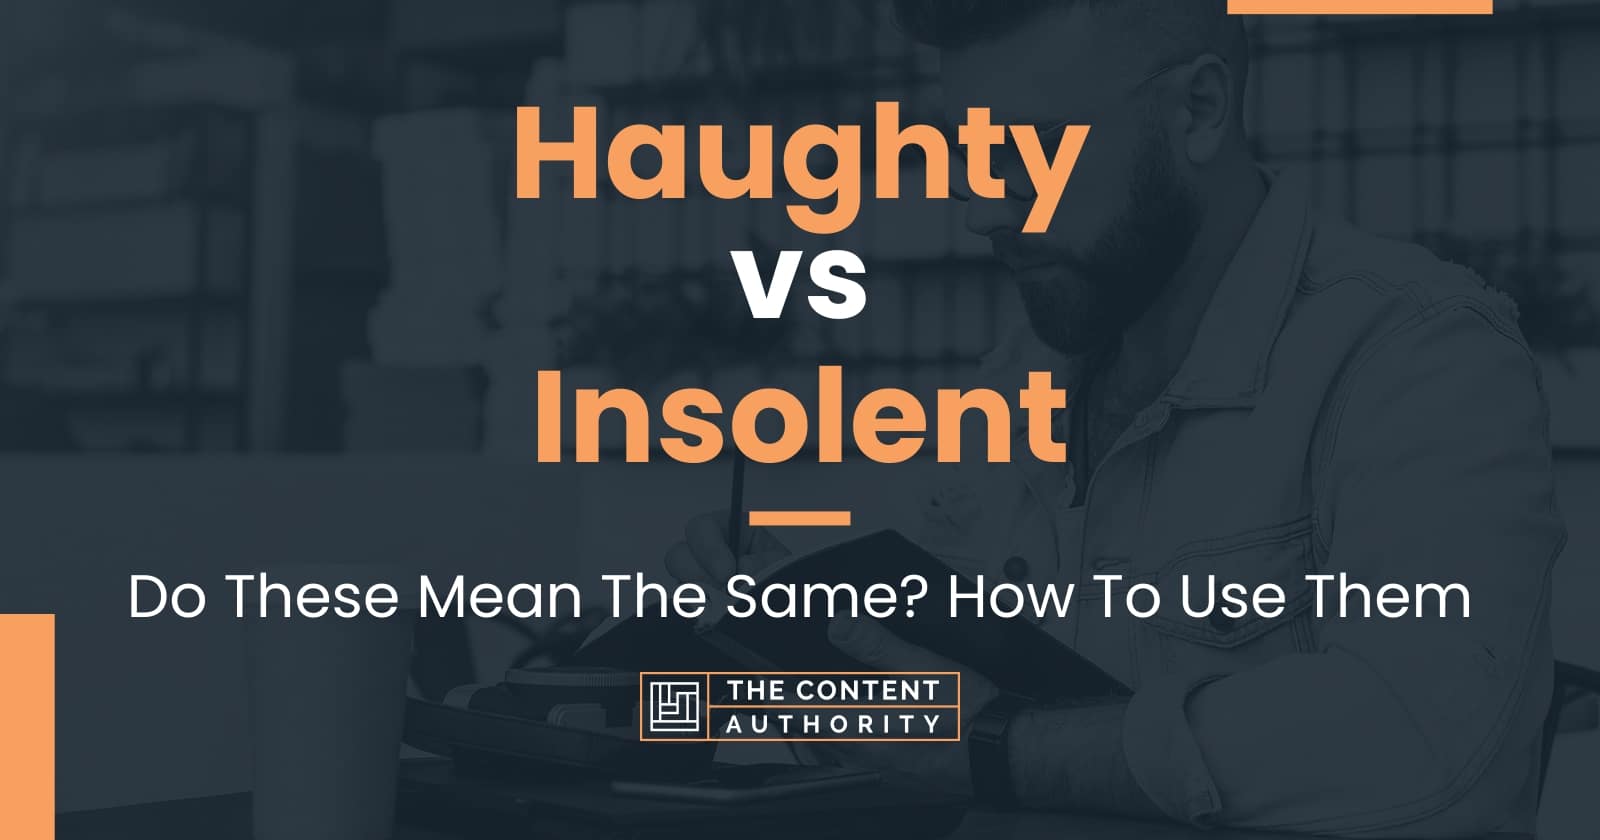 Haughty Vs Insolent Do These Mean The Same How To Use Them